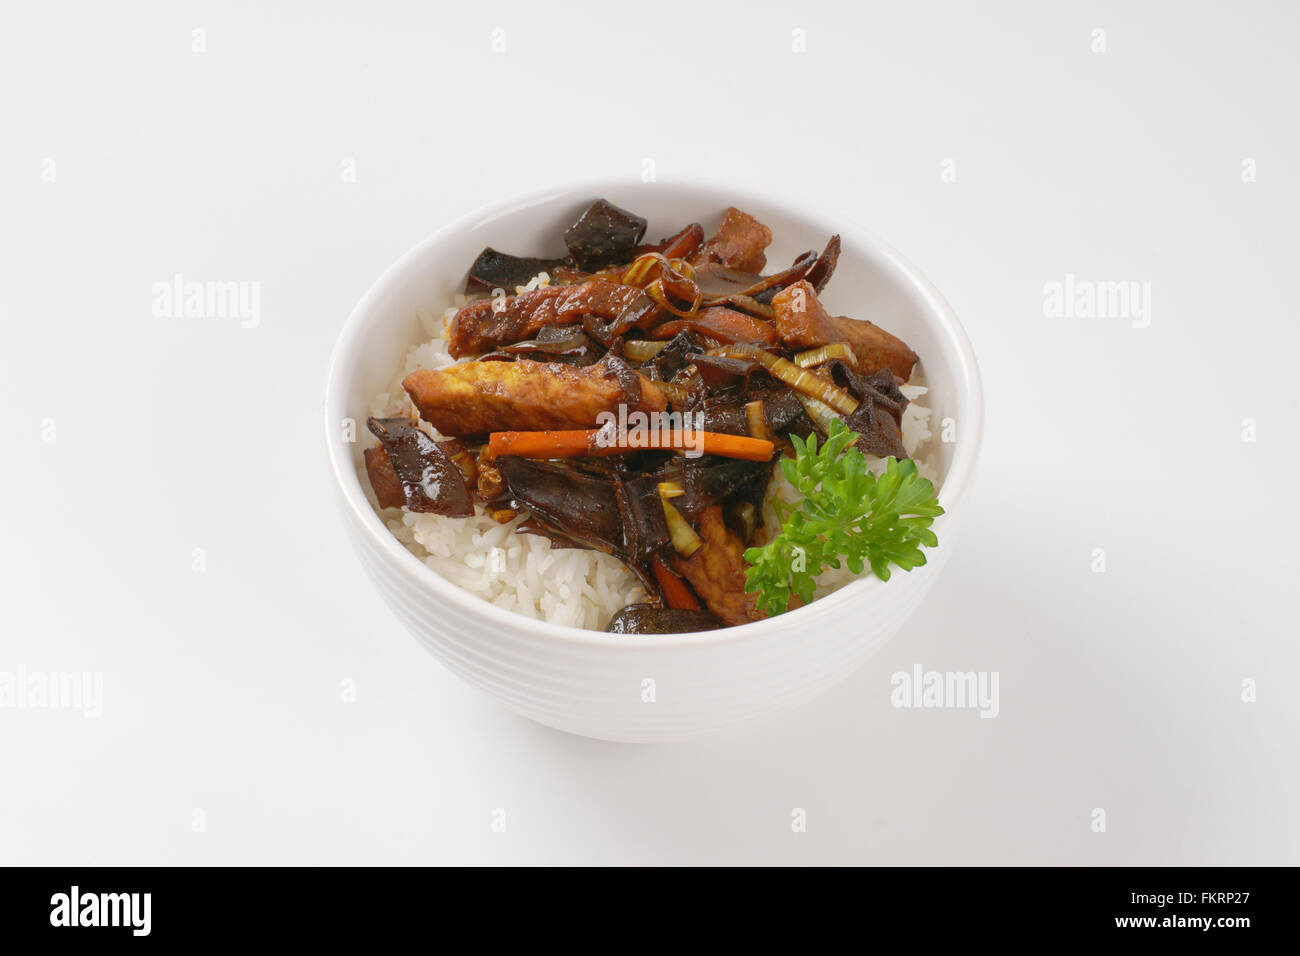 roasted meat, ear mushrooms and rice noodles Stock Photo